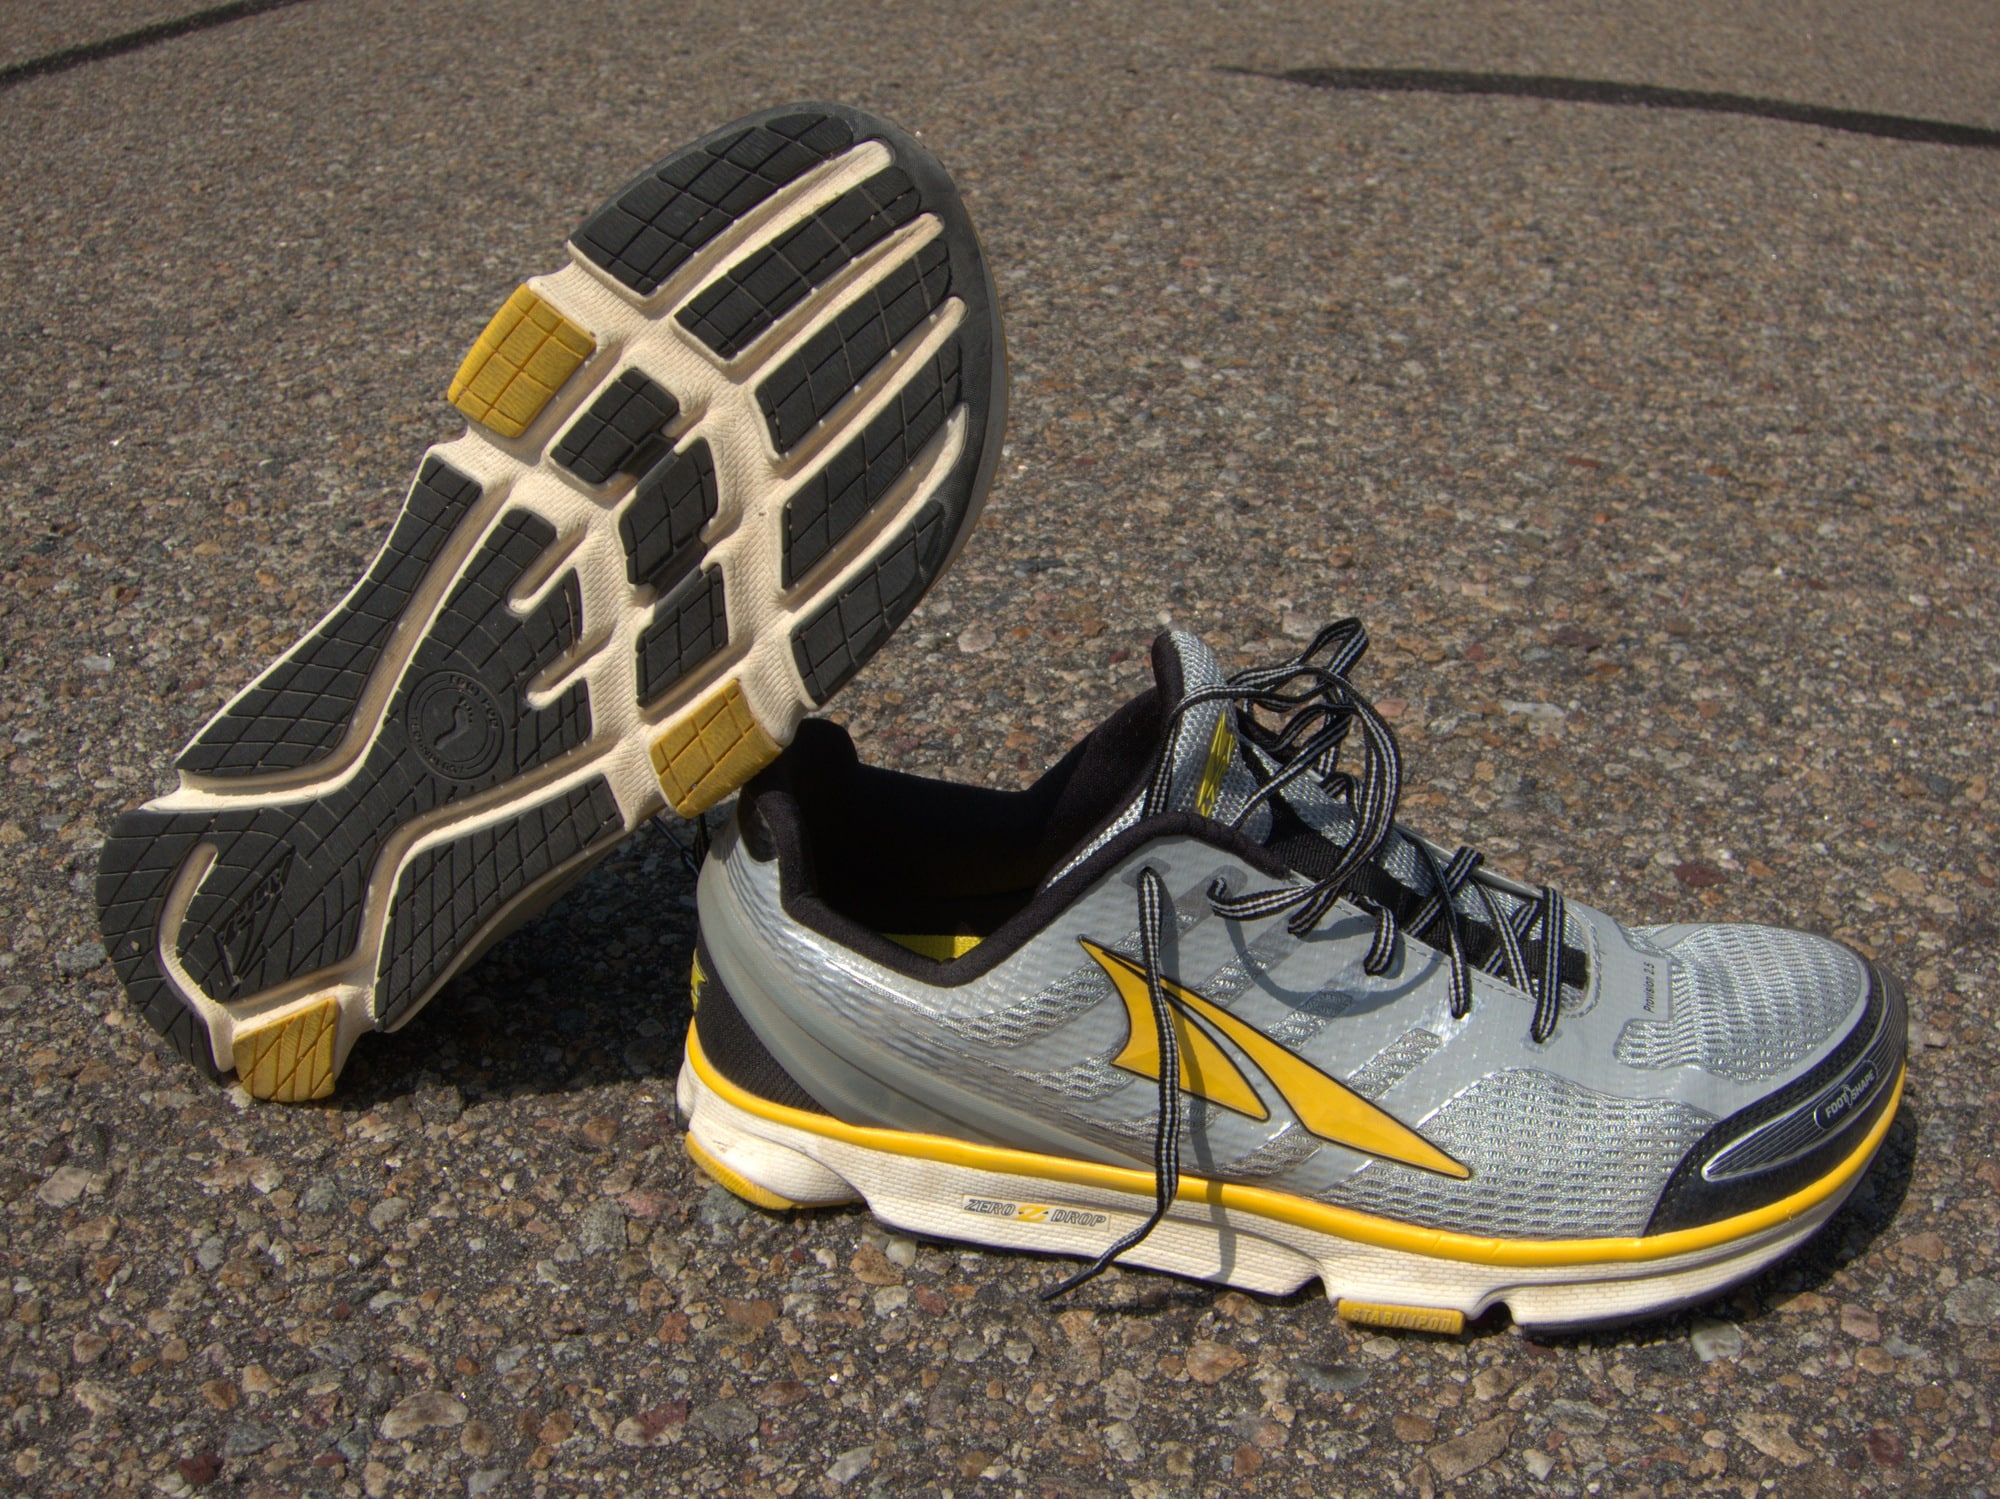 altra provision shoes